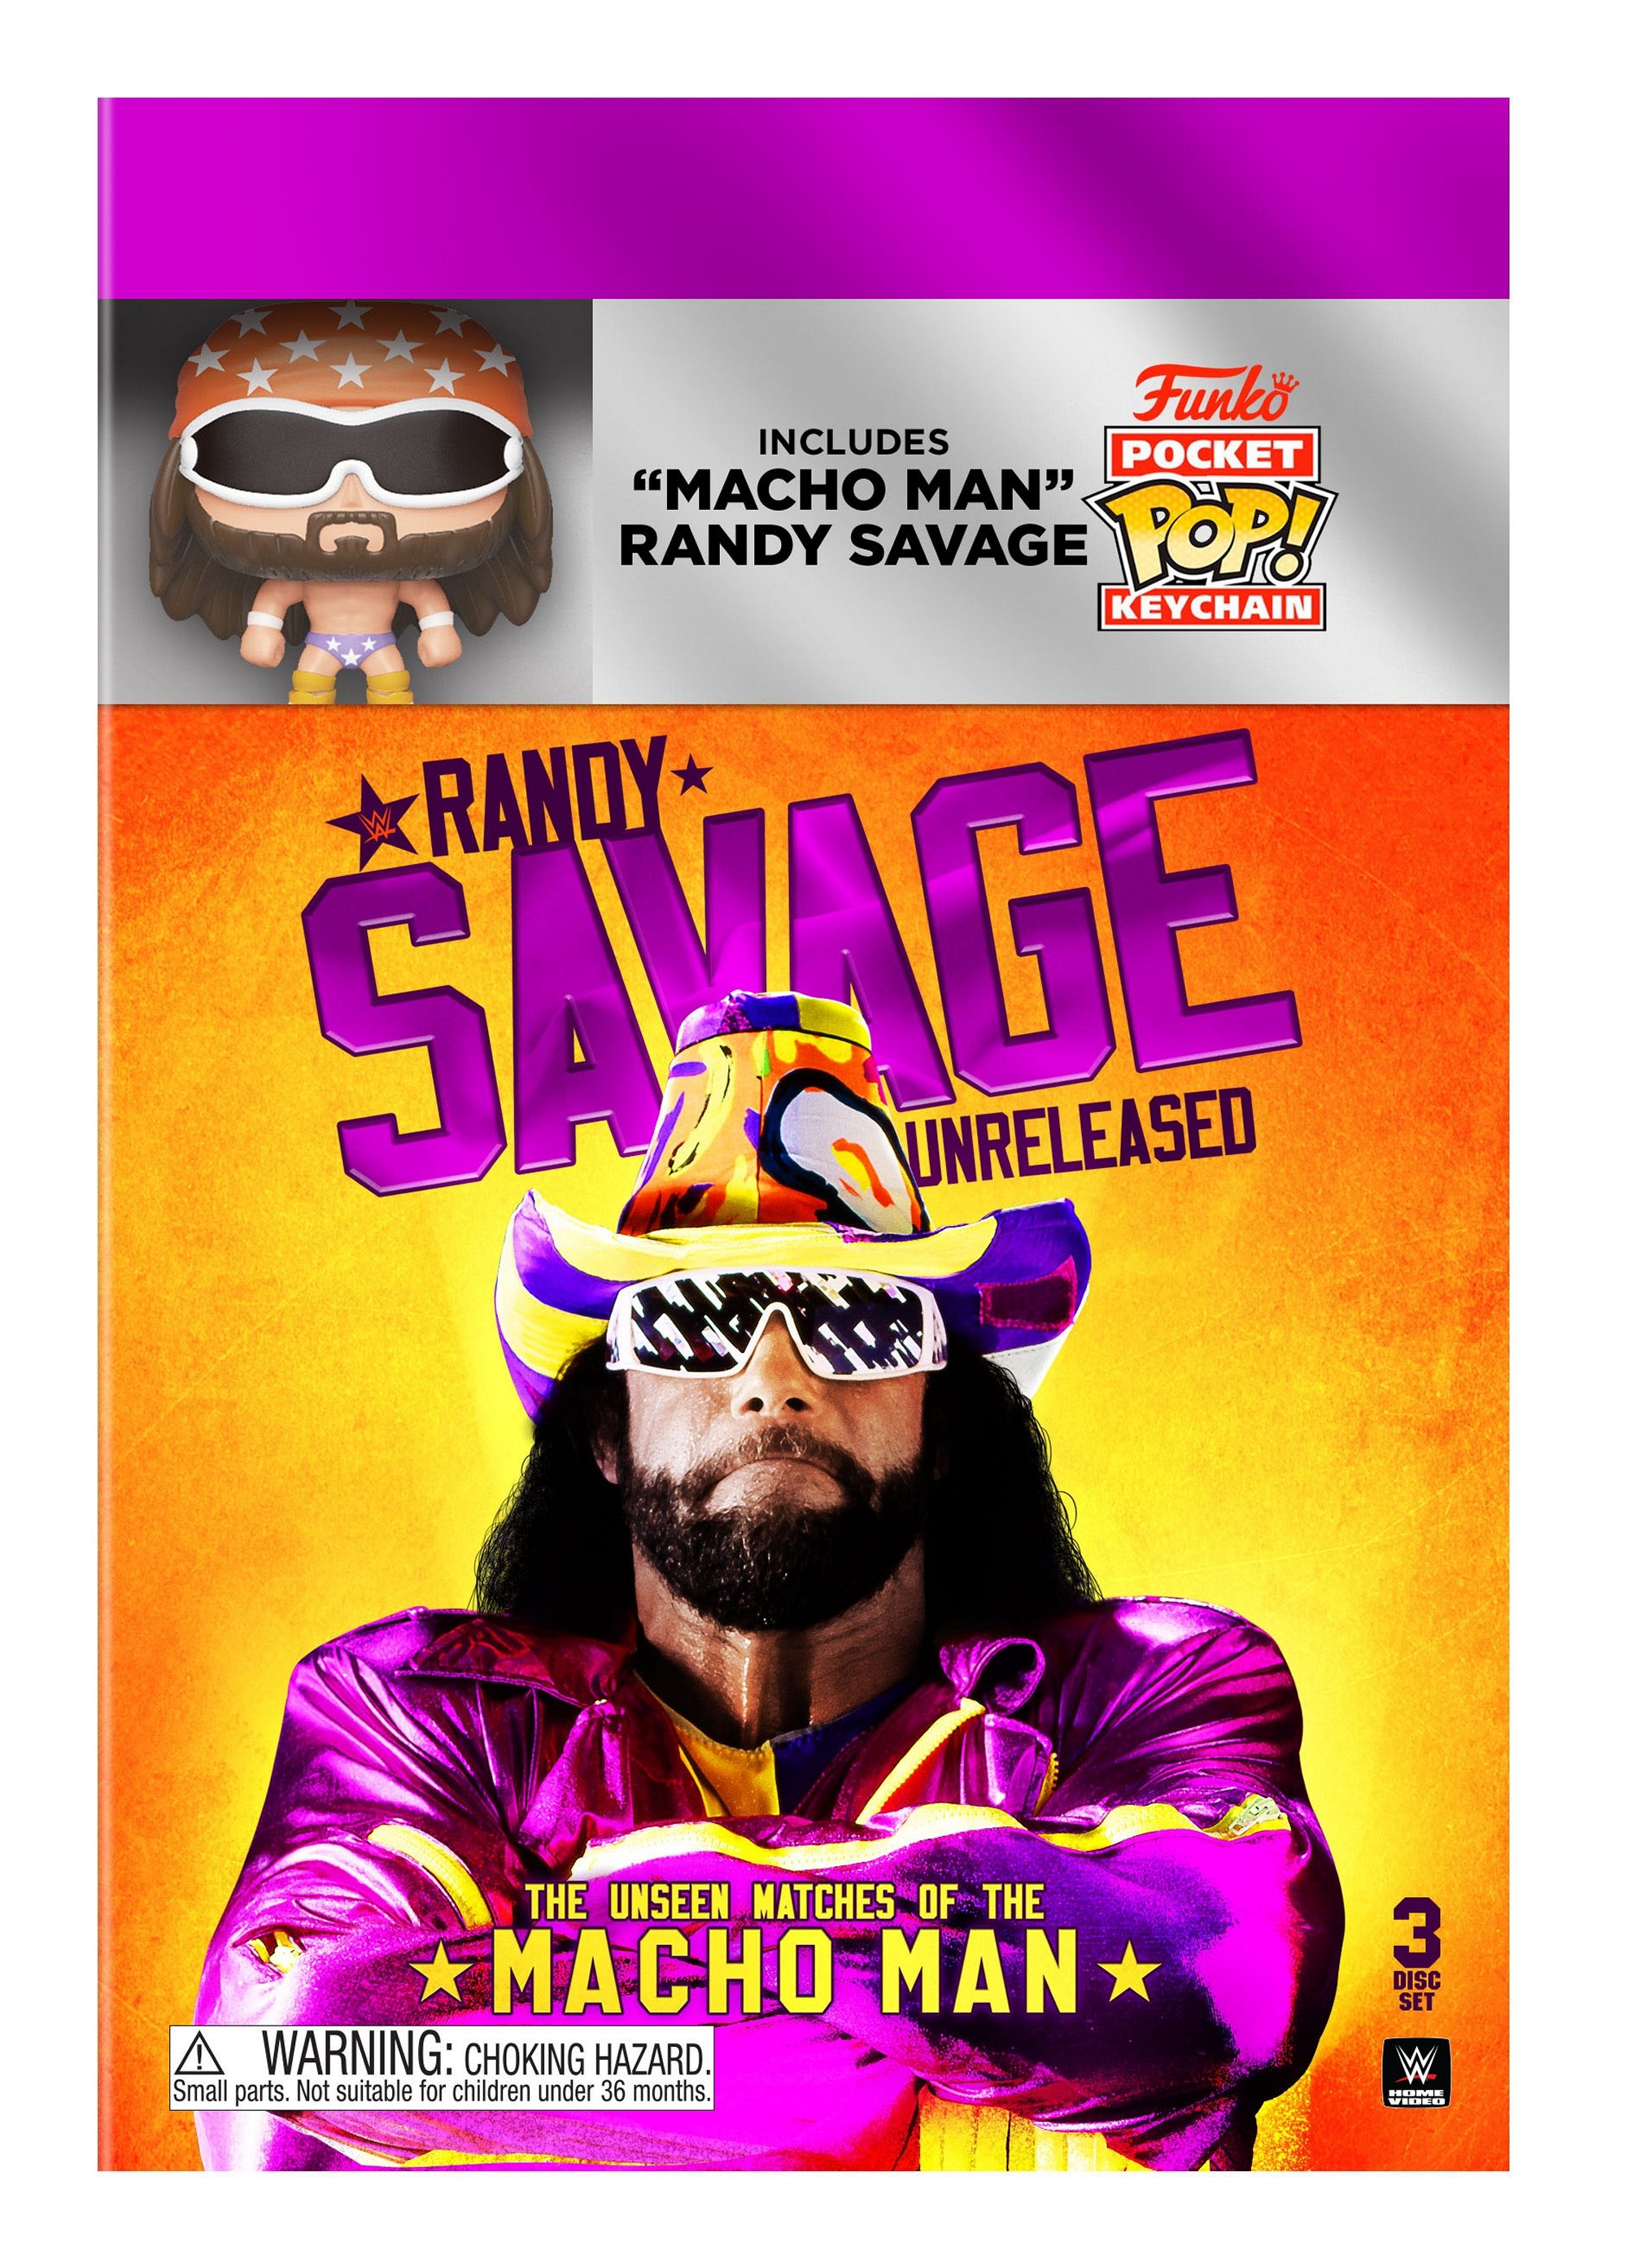 WWE: Randy Savage Unreleased: The Unseen Matches Of The Macho Man - DVD [ 2018 ]